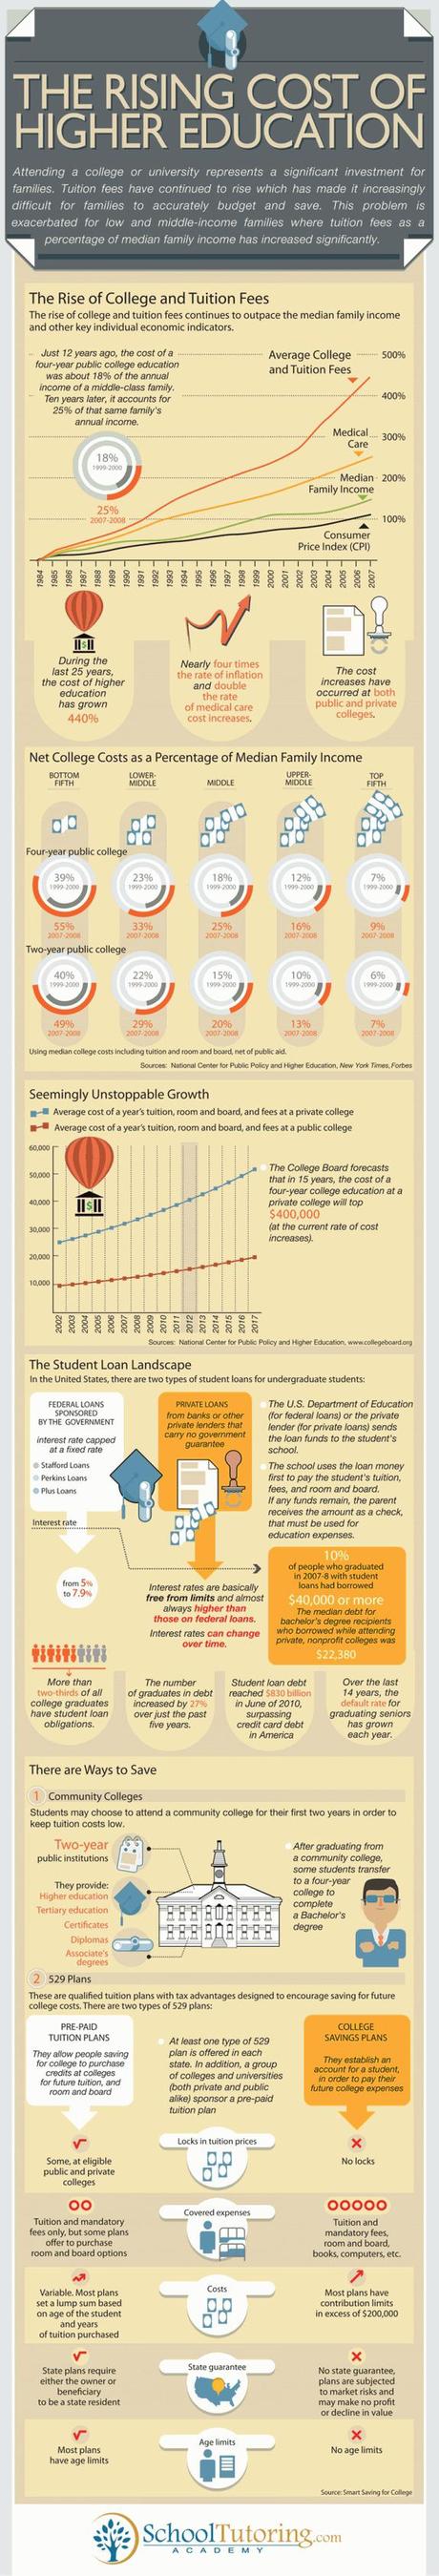 The Rising Cost of Higher Education infographic